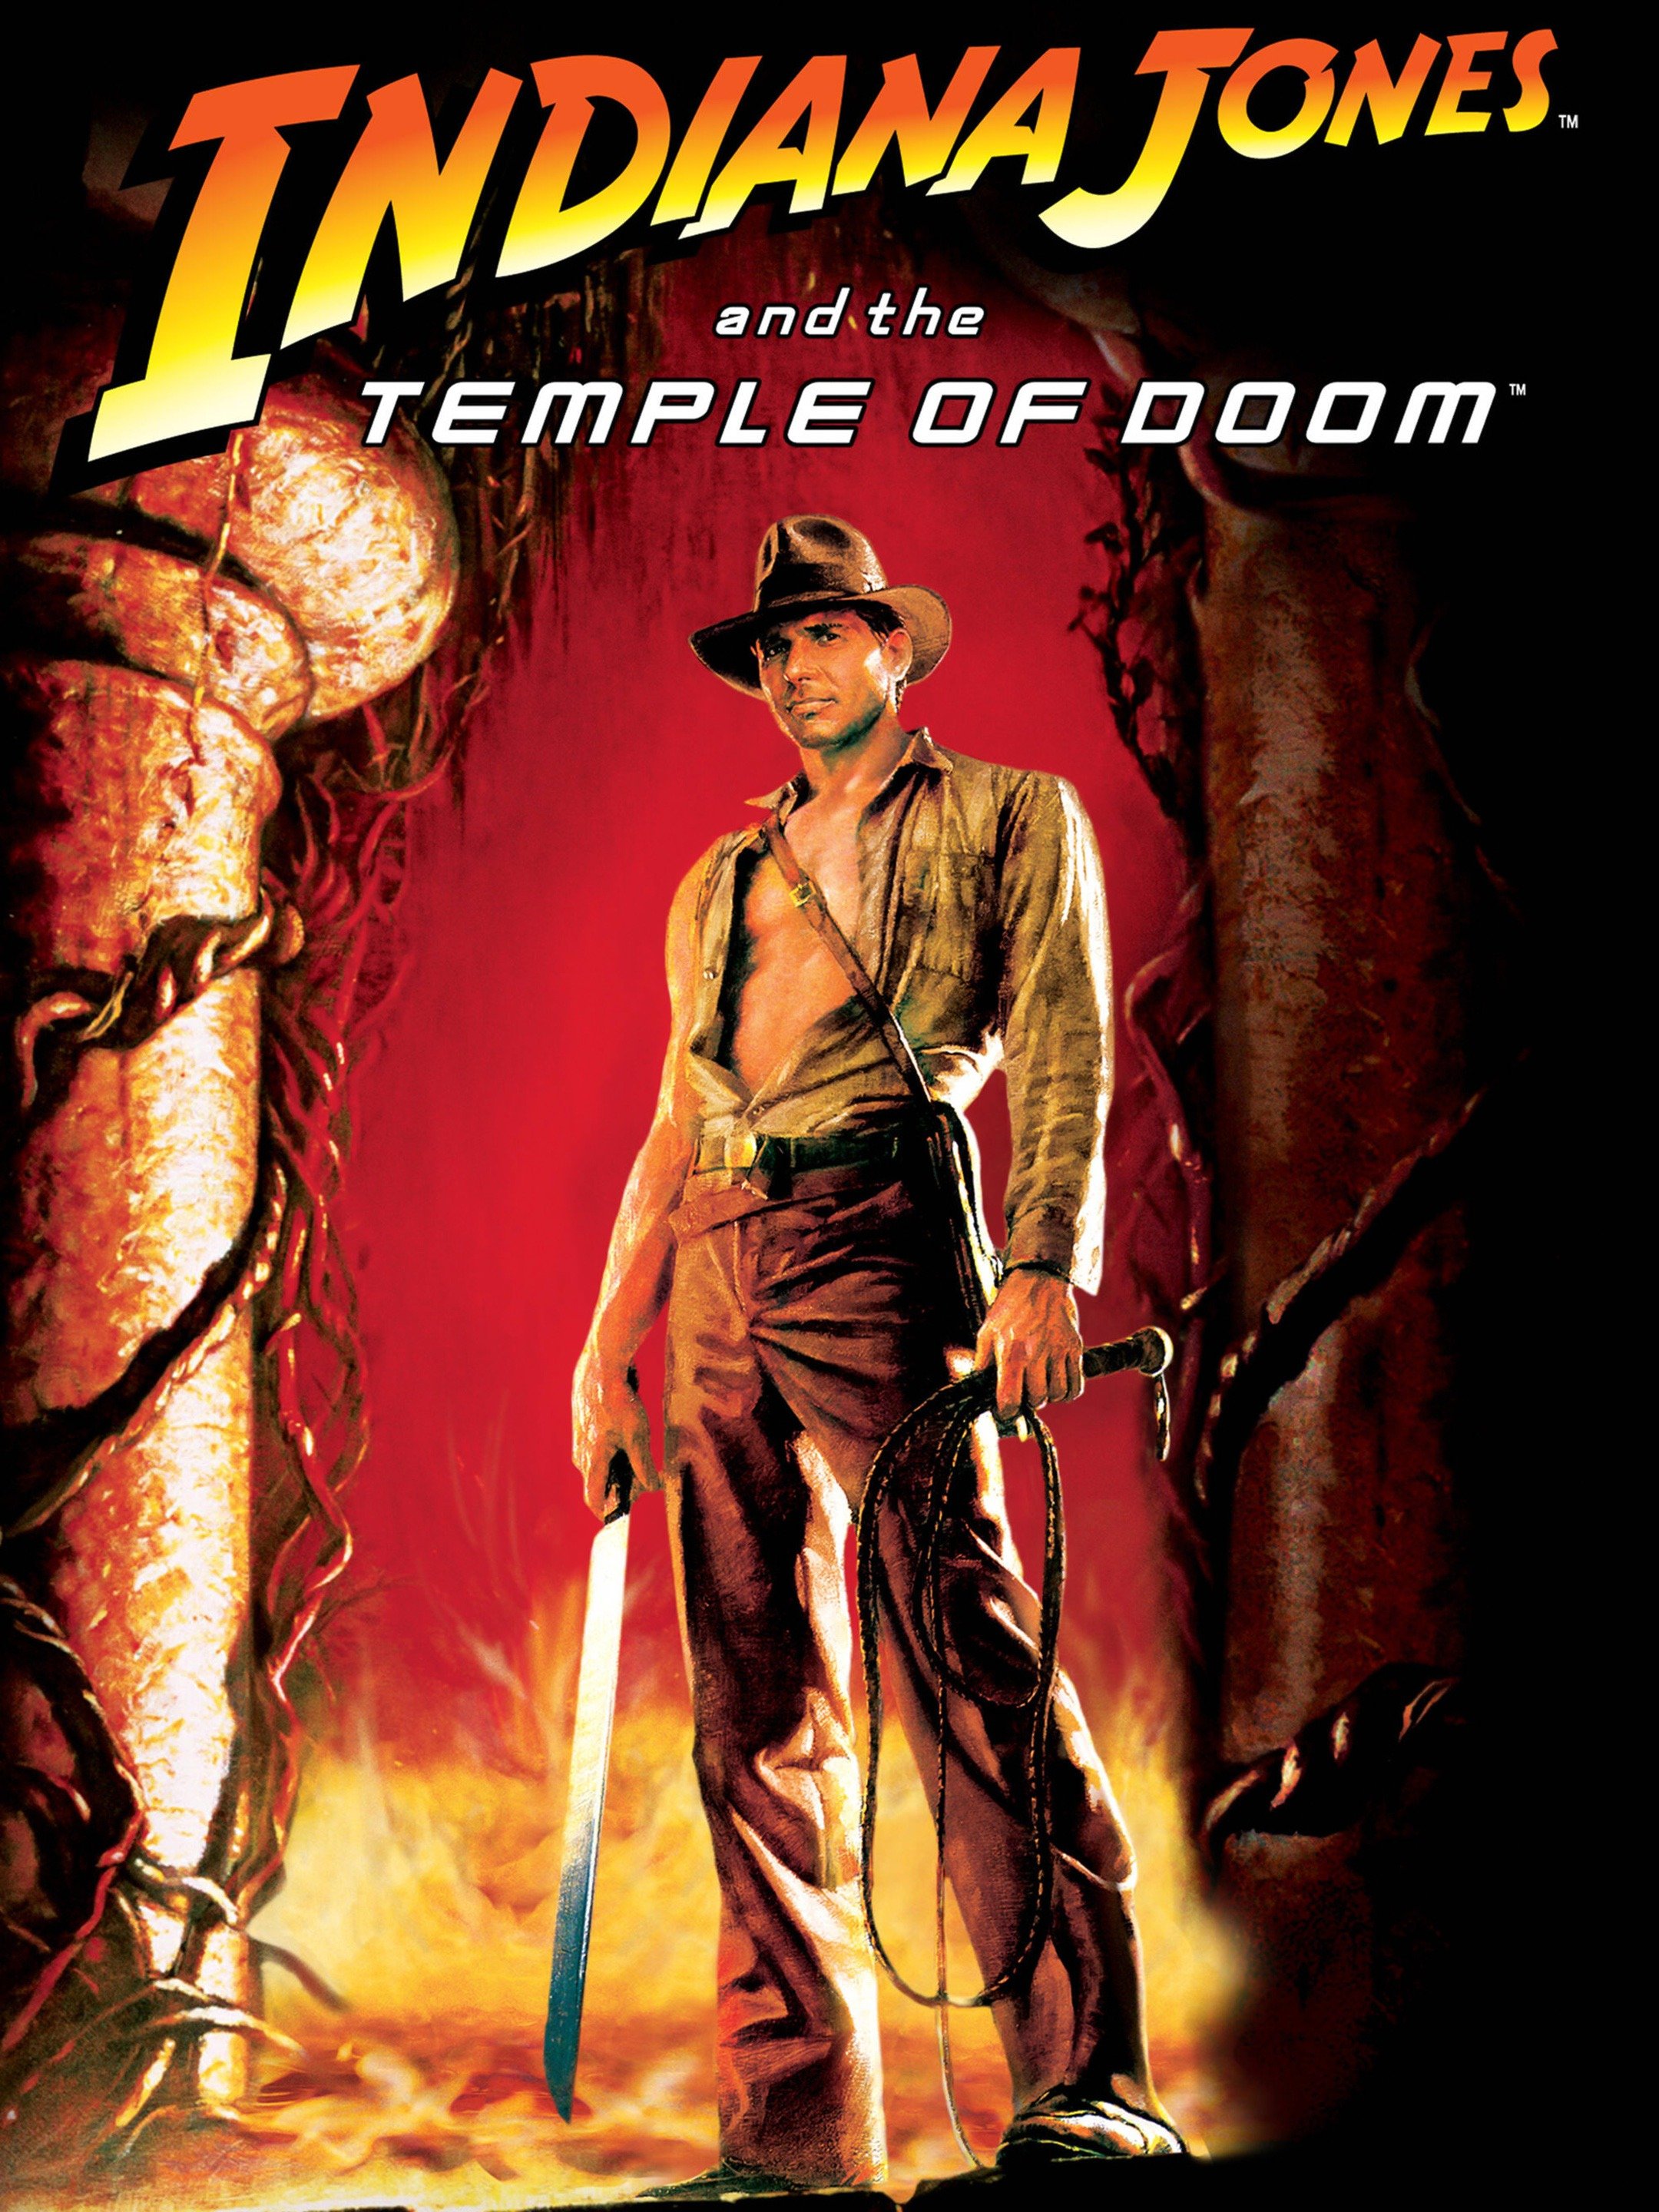 Indiana Jones and the Temple of Doom (1984) - Rotten Tomatoes